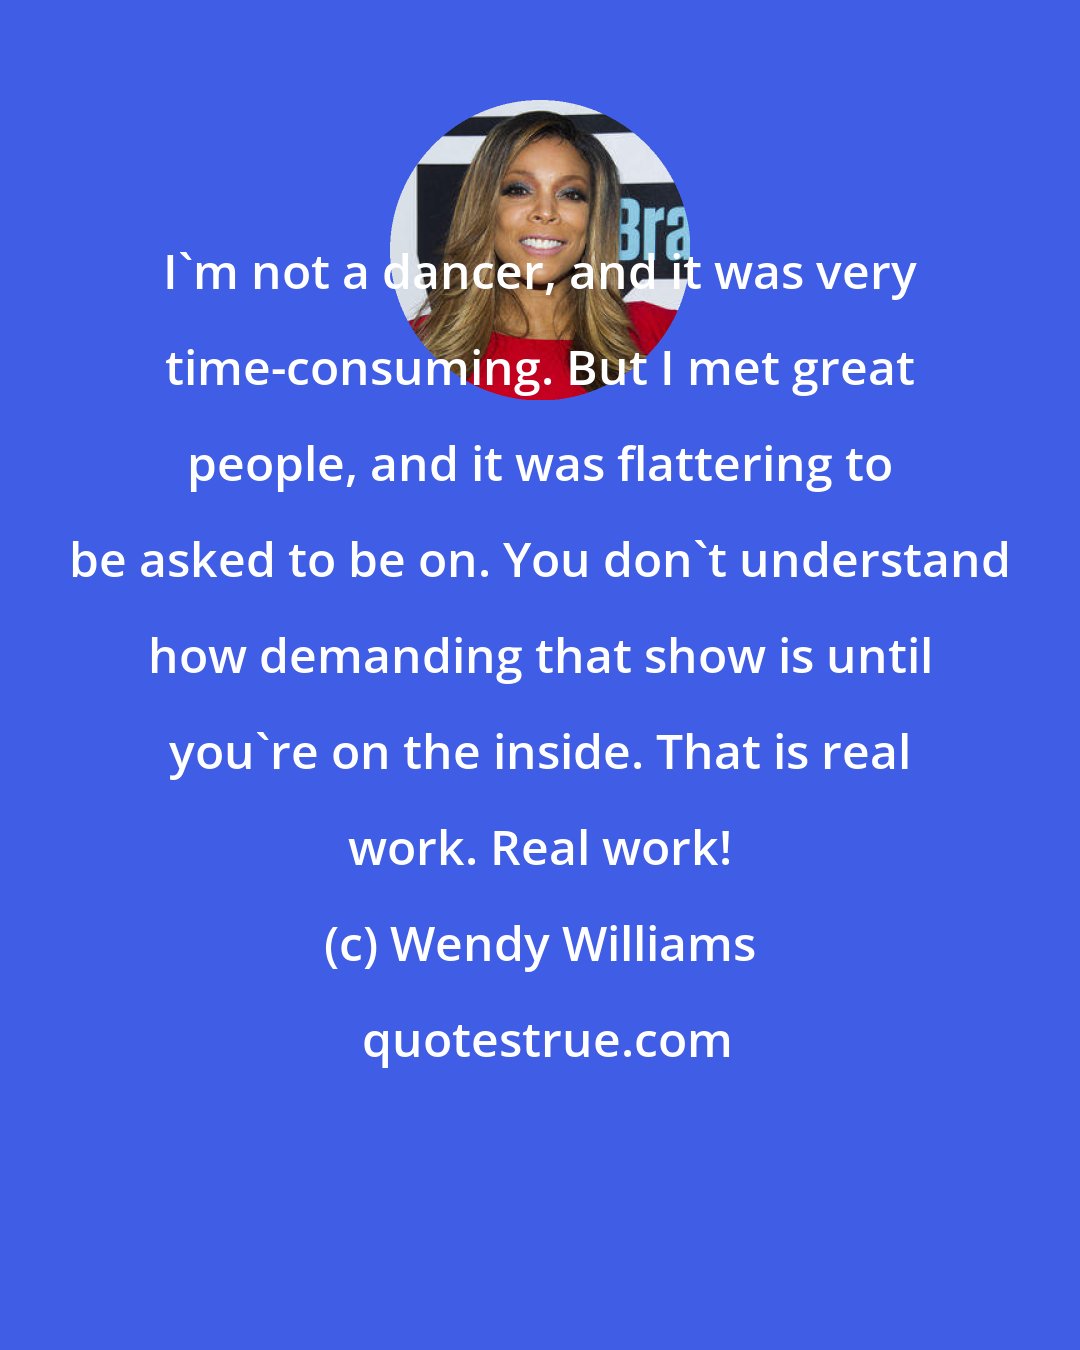 Wendy Williams: I'm not a dancer, and it was very time-consuming. But I met great people, and it was flattering to be asked to be on. You don't understand how demanding that show is until you're on the inside. That is real work. Real work!